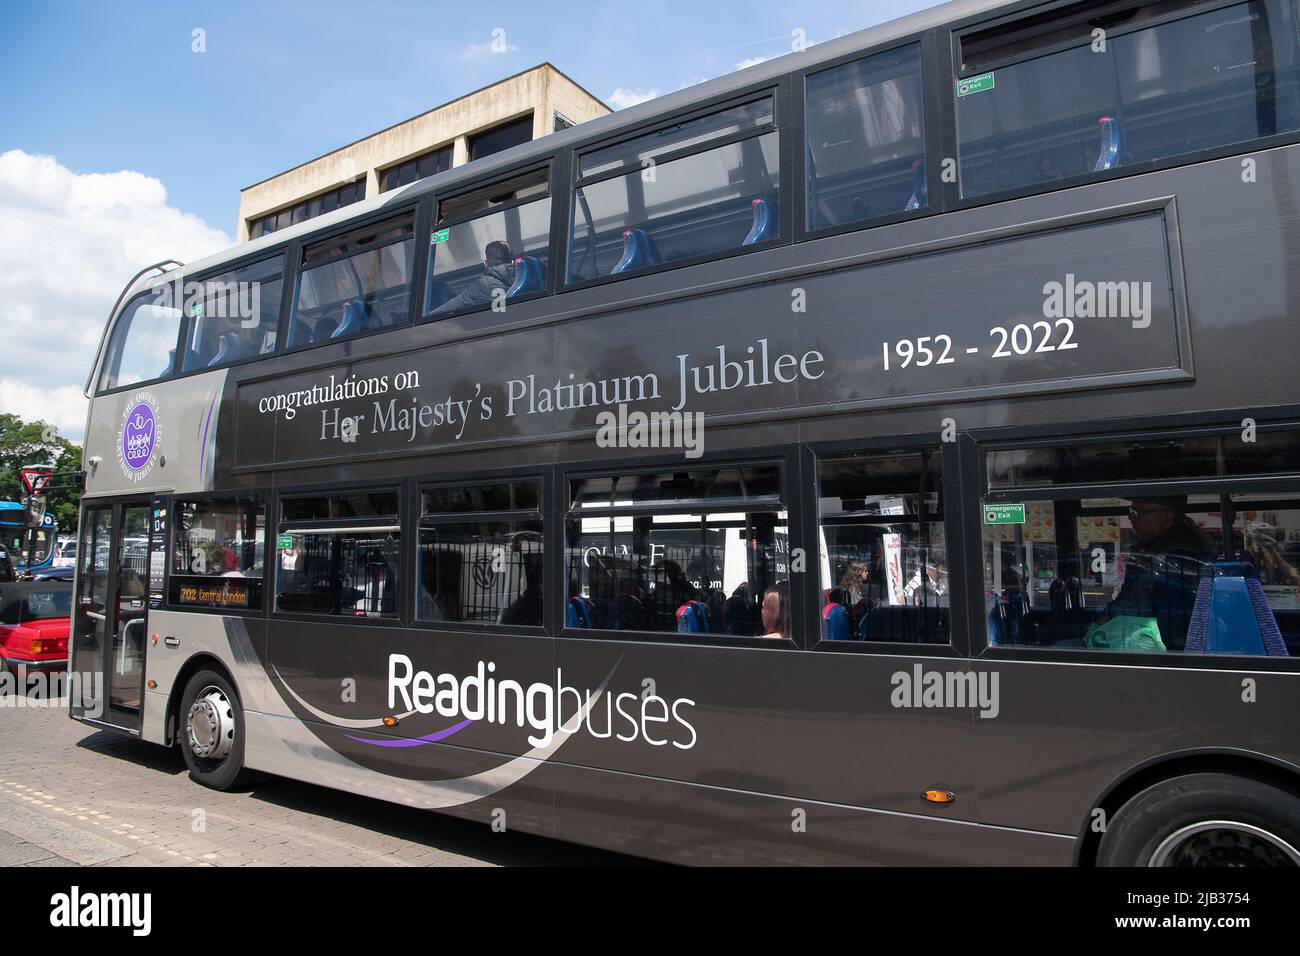 Windsor, Berkshire, UK. 2nd June, 2022. A special Jubilee bus from Reading Buses. Windsor was packed with locals, tourists and visitors today celebrating Her Majesty the Queen's Platinum Jubilee. Credit: Maureen McLean/Alamy Live News Stock Photo